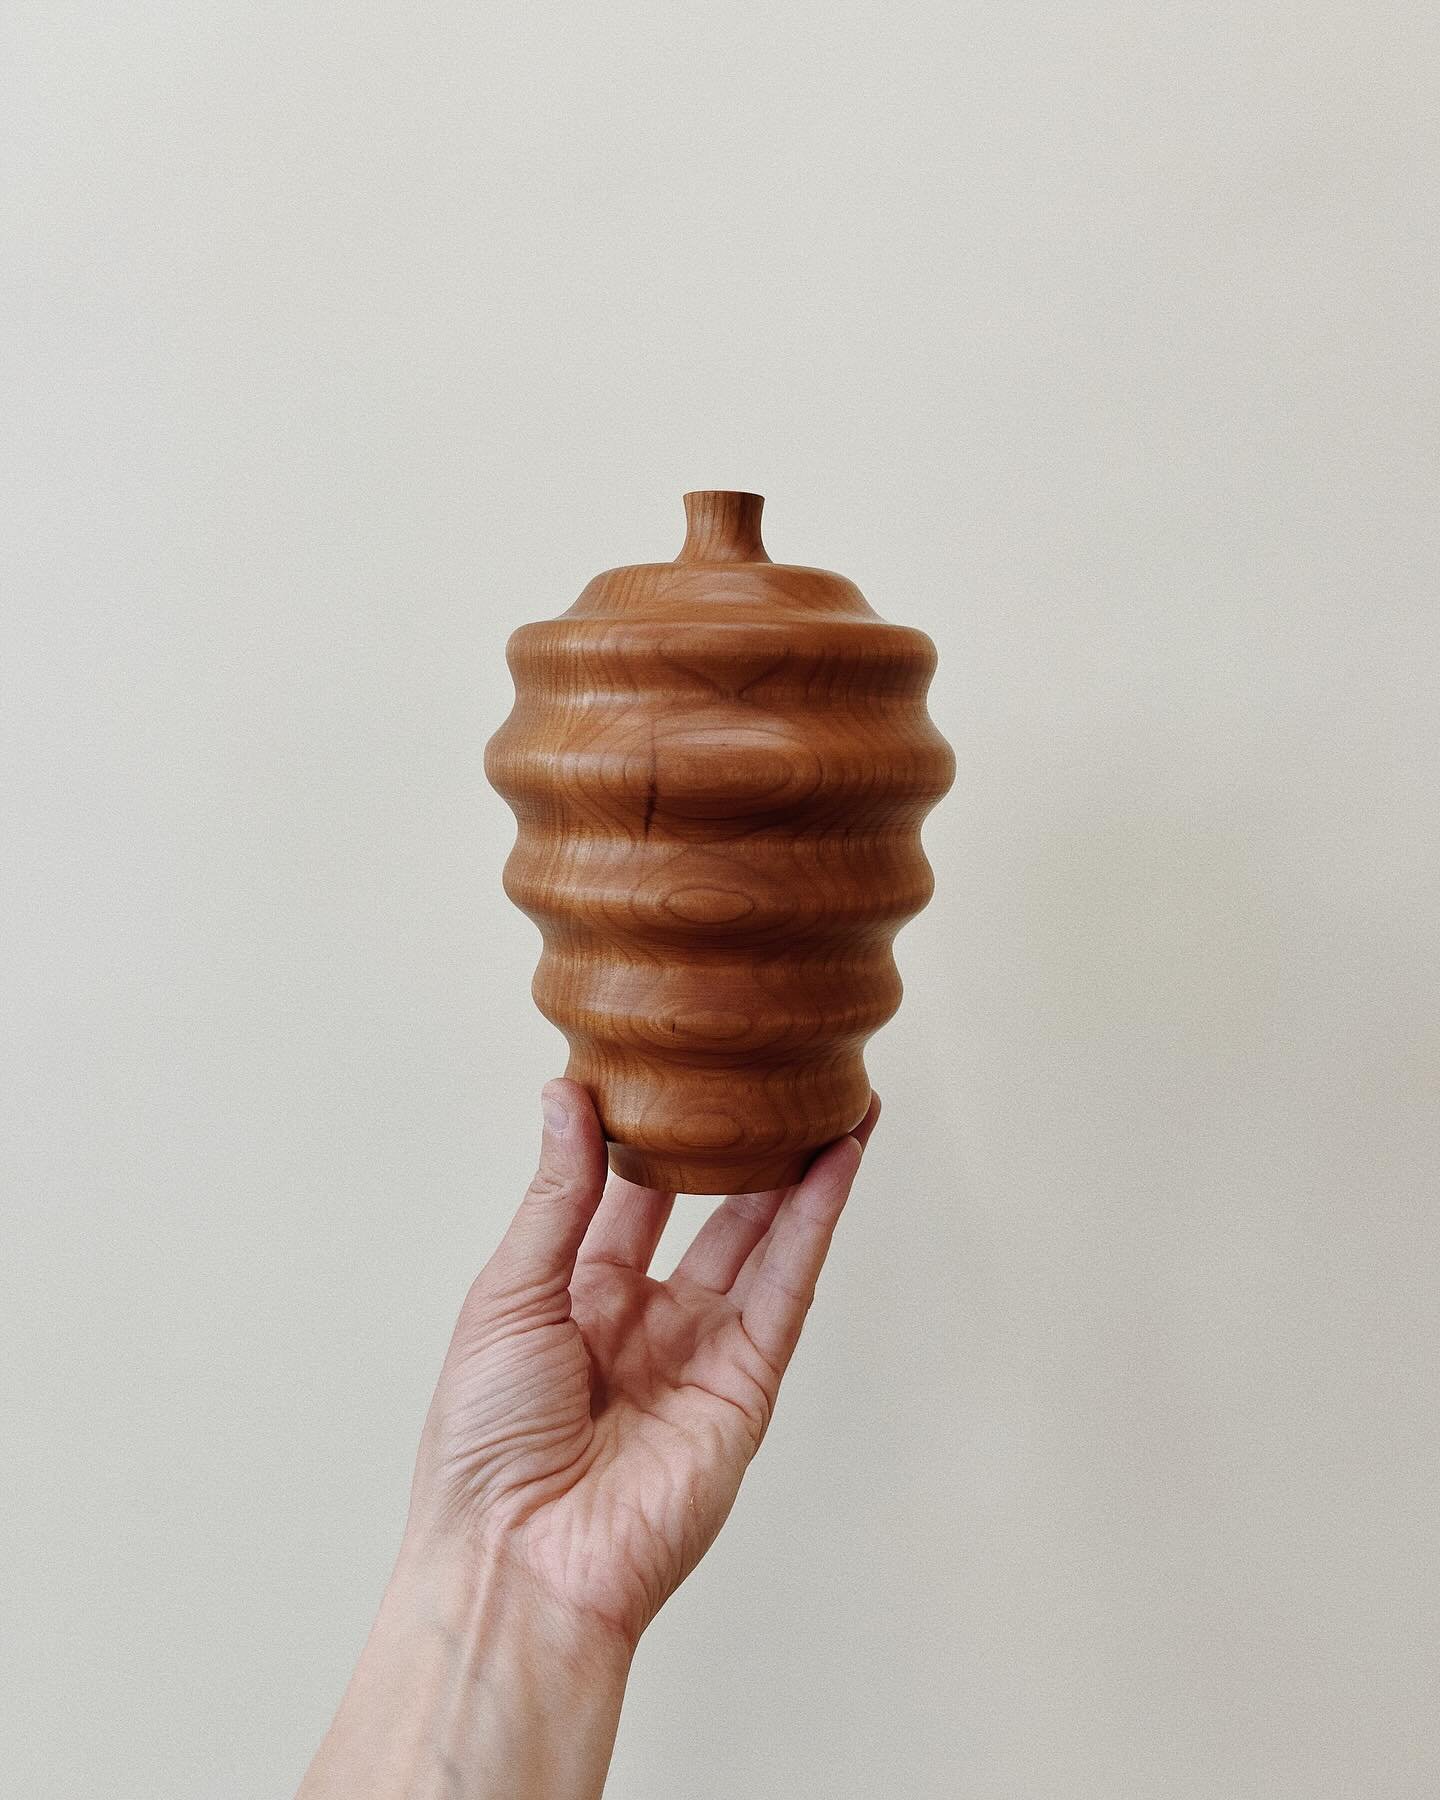 I just really like this fun lil squiggly fella 〰️

.
.
.
.
.
.
.
.
.
#vase #homedecor #woodenvase #woodworking #woodturning #detail #design